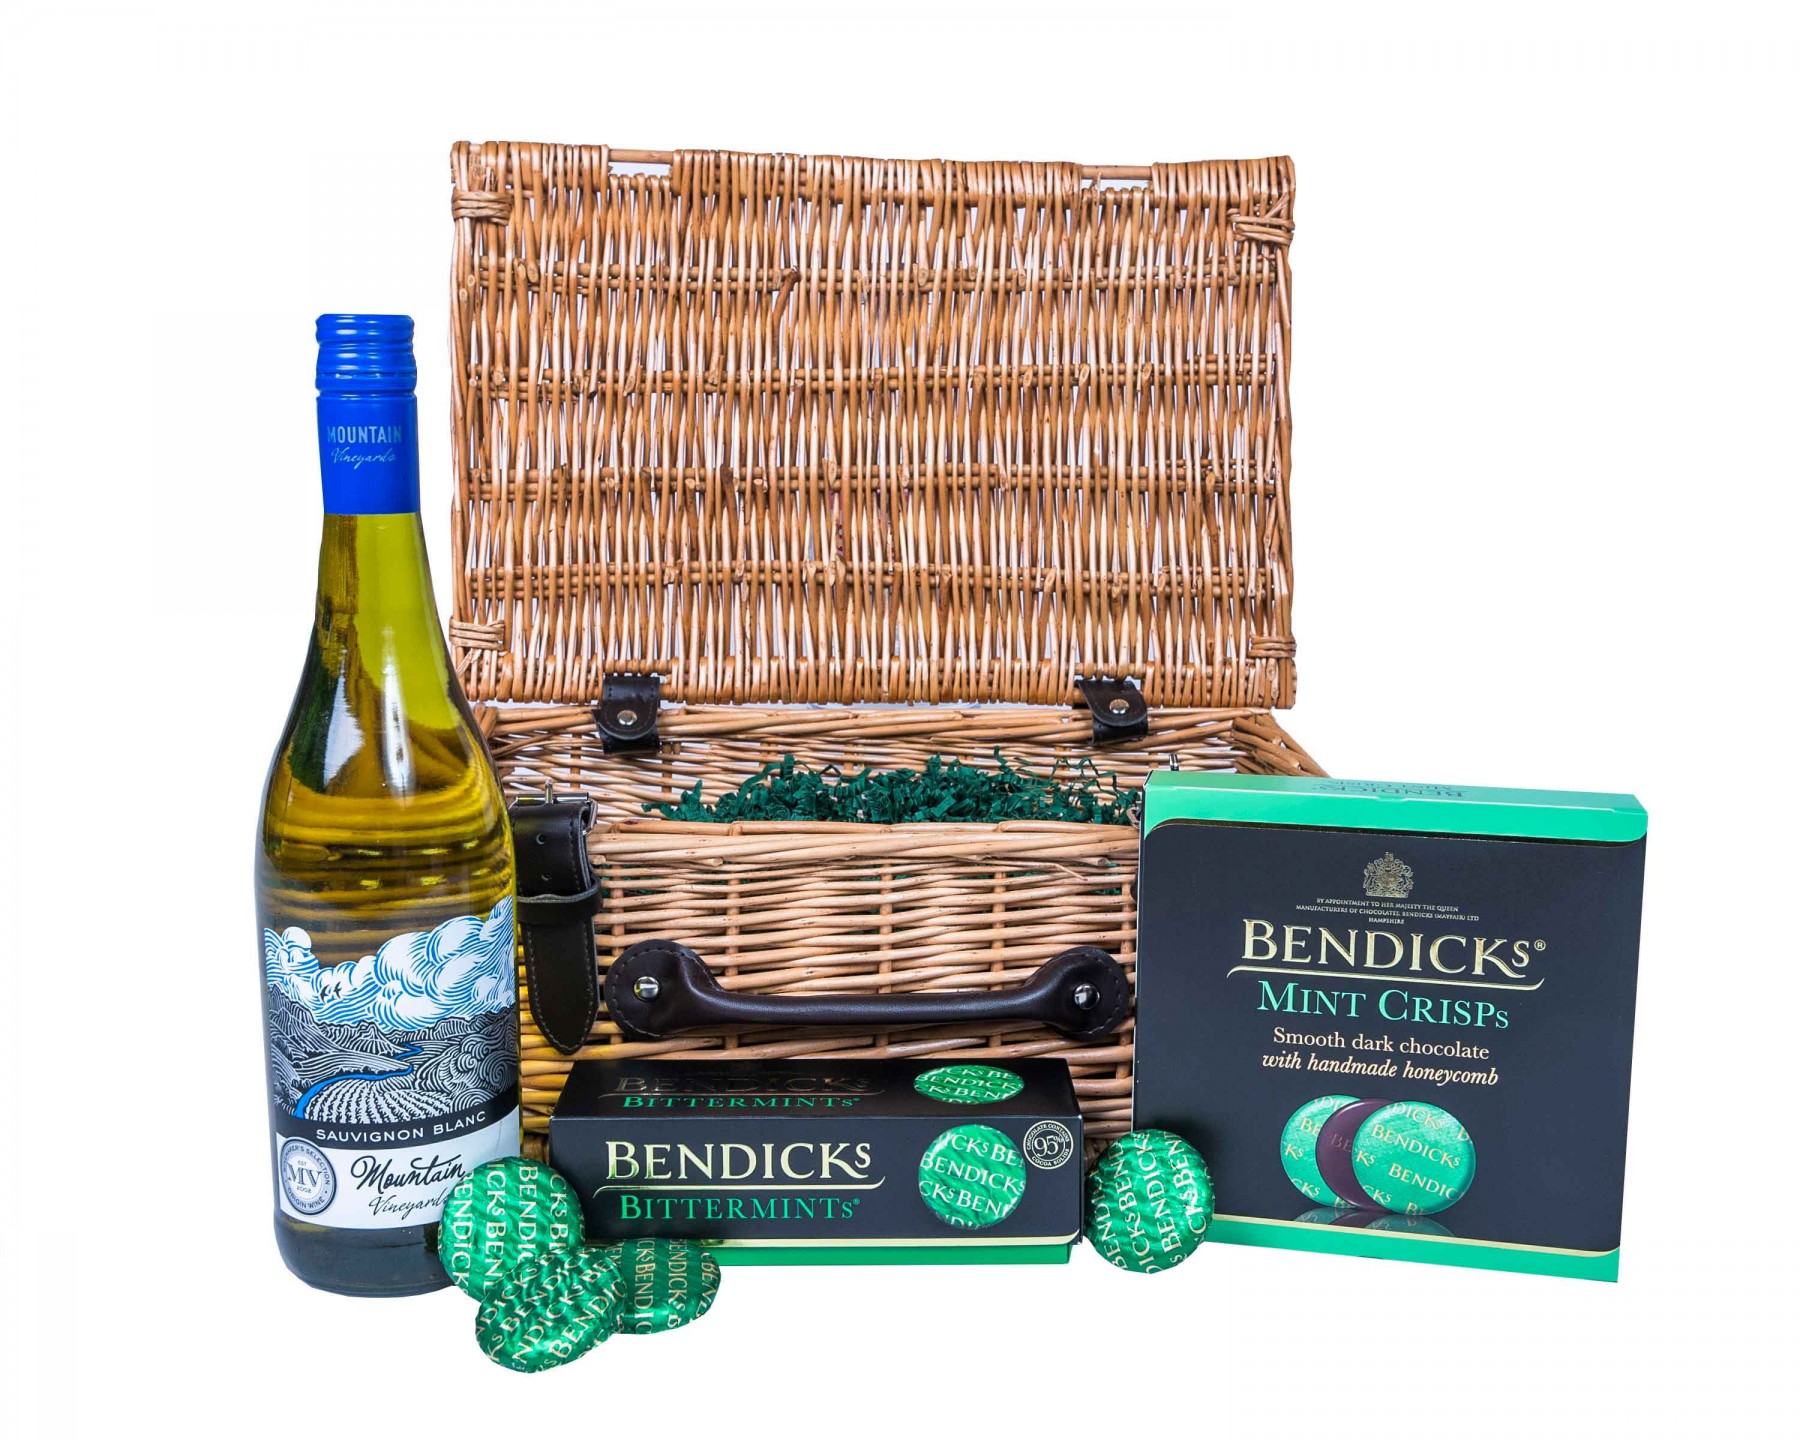 Bendicks and White Wine Wicker Hamper - currently shipping in a wicker tray